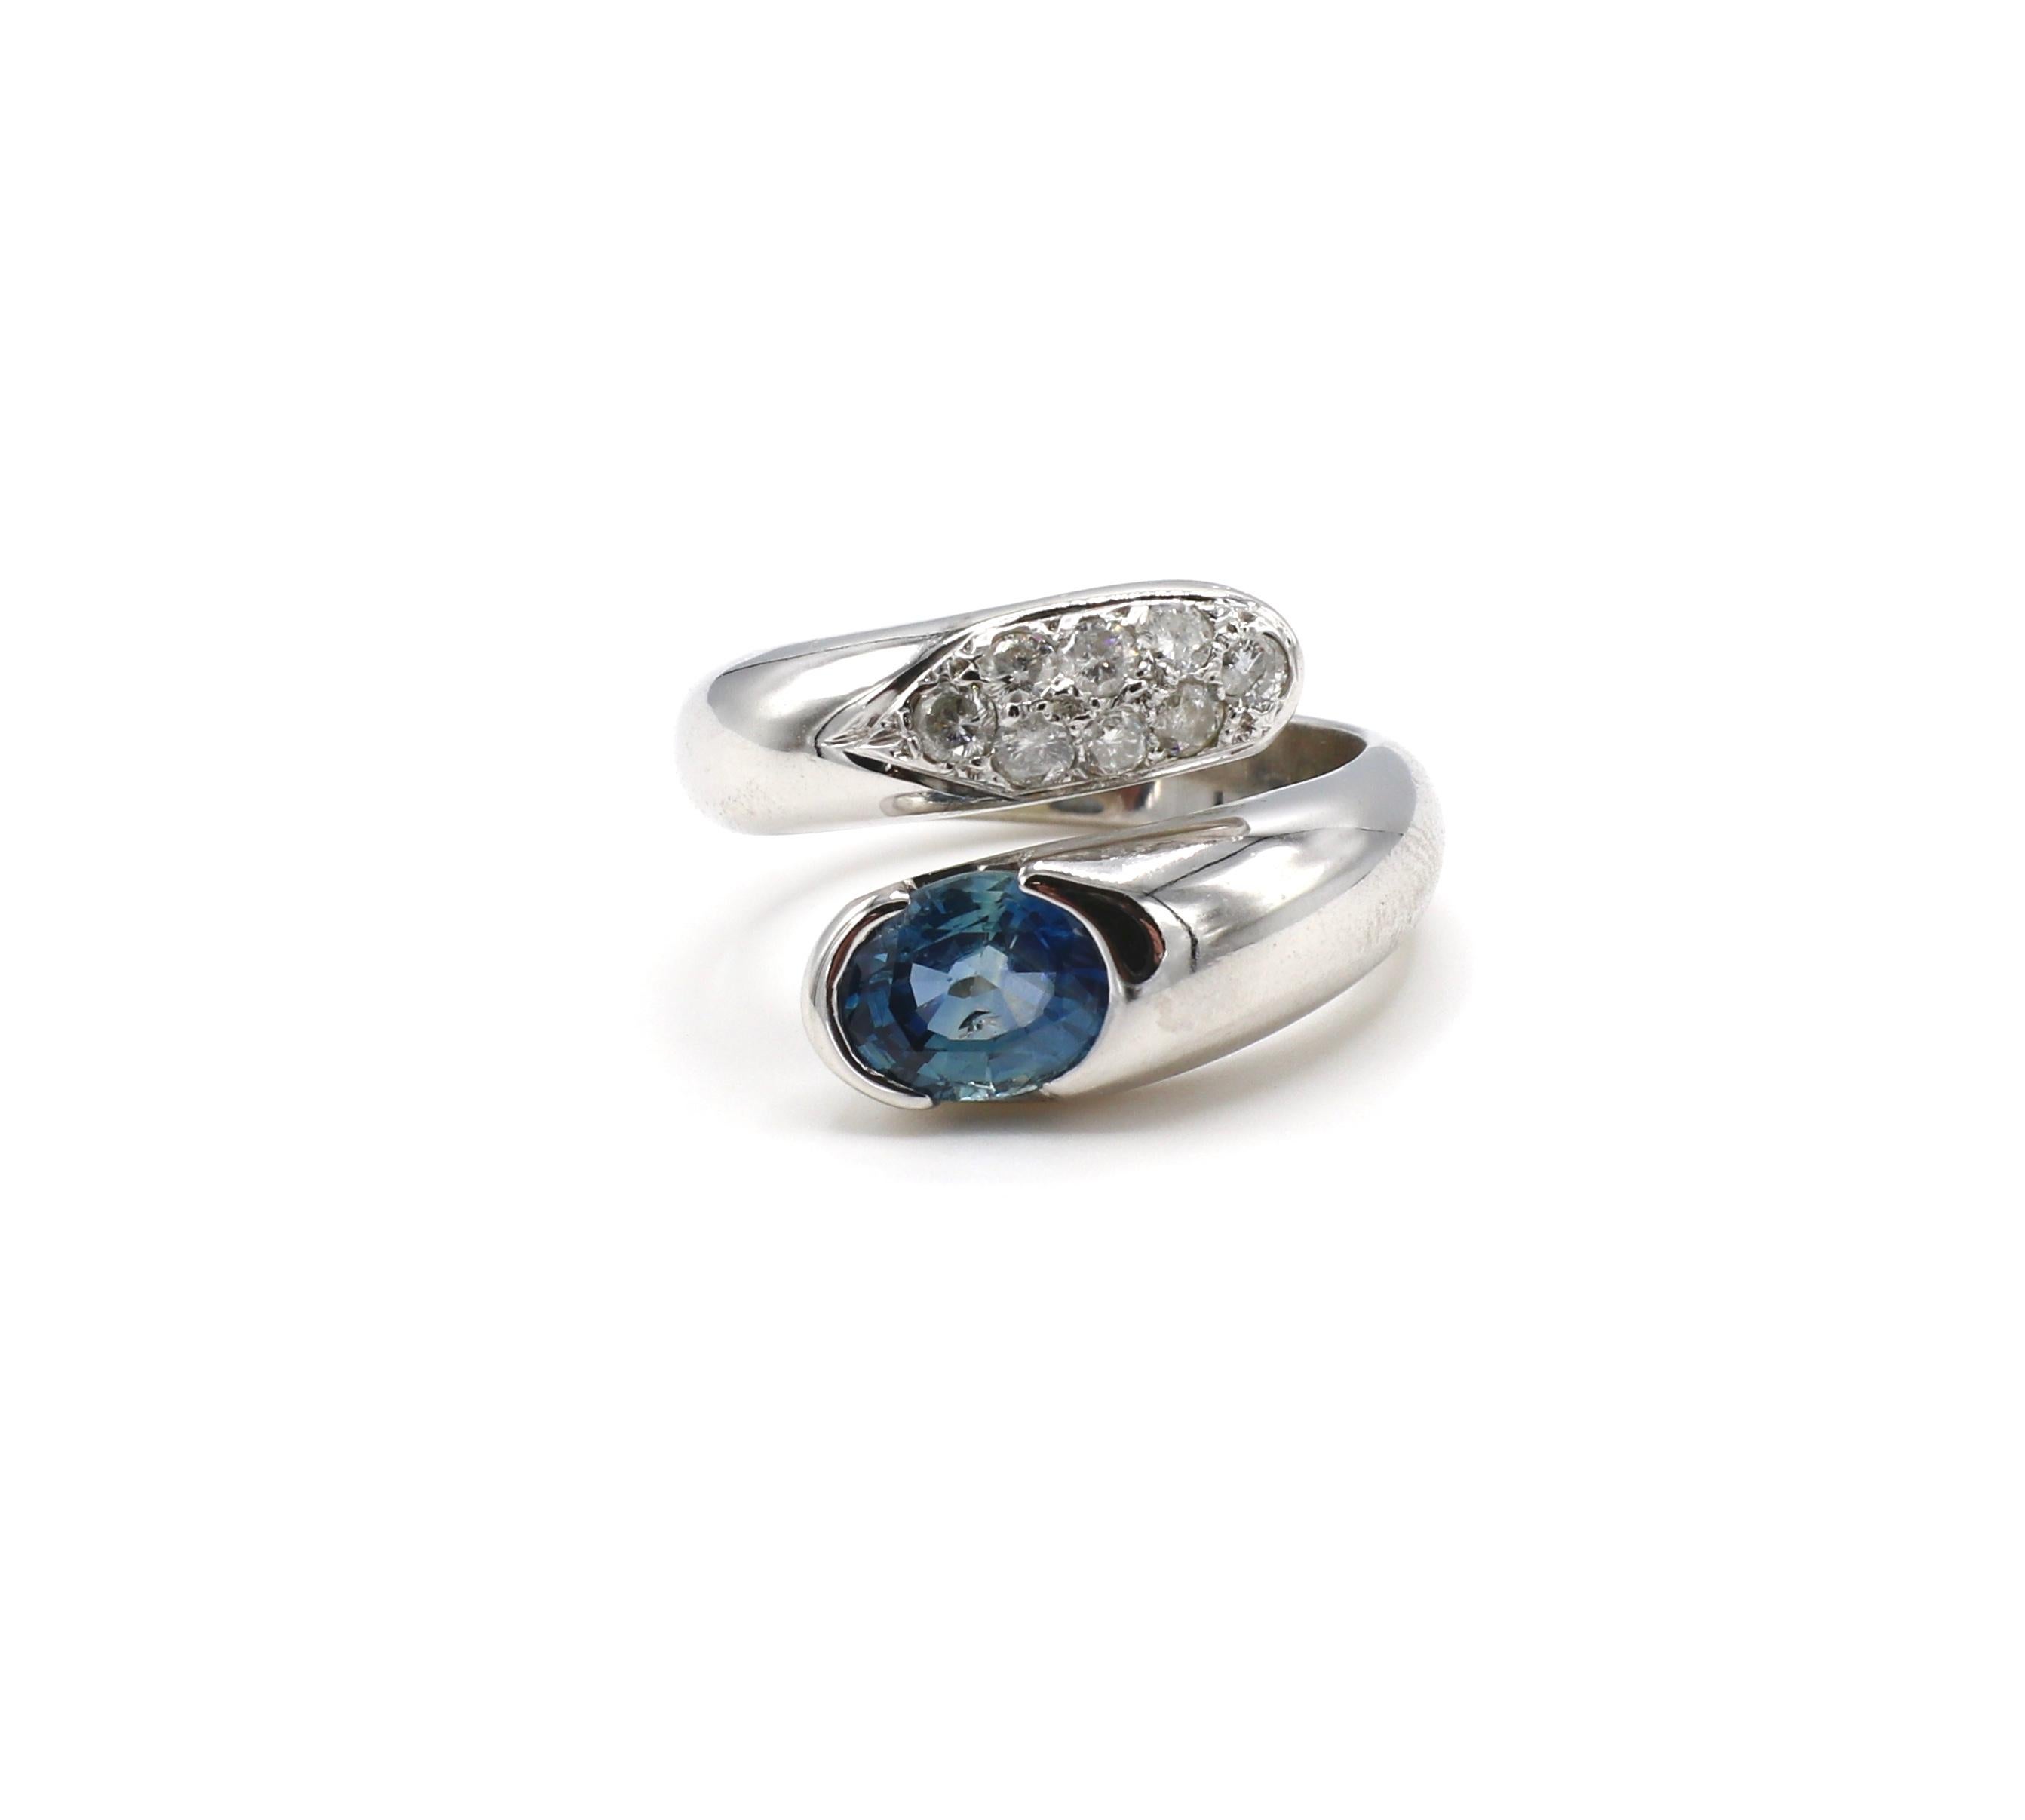 14K White Gold Diamond & Blue Sapphire Bypass Cocktail Ring 

Sapphire: Oval, approx. 1ct
Diamonds: 8 round diamonds, approx. 0.40ctw G SI
Ring is approx. 14mm at front and 4mm at base
Weight: 9.8 grams
Ring Size: 6.25 (US)
14KT White Gold
Stamps: